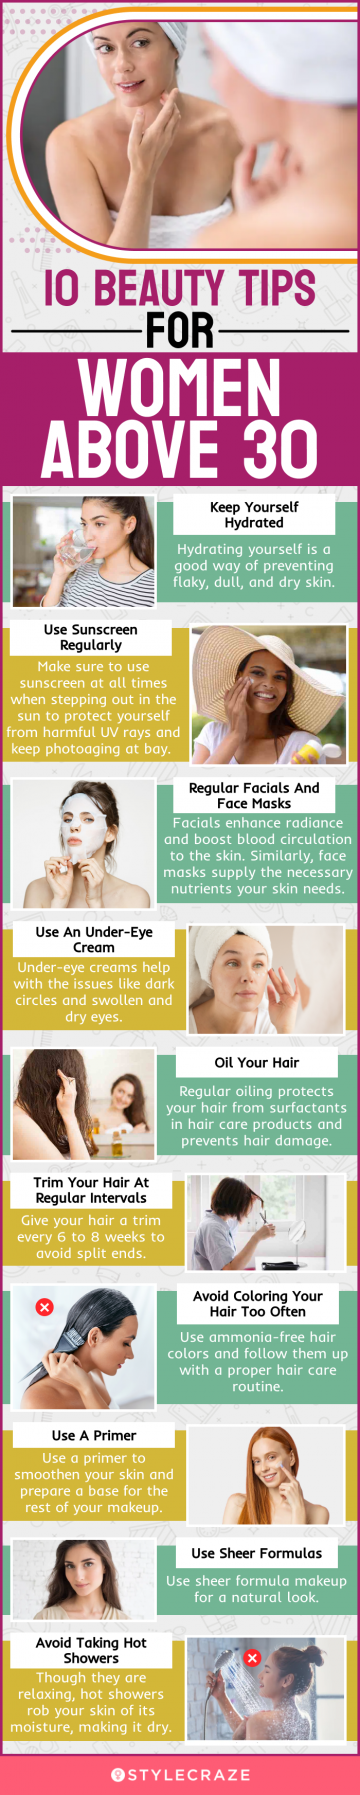 10 beauty tips for women above 30 (infographic)